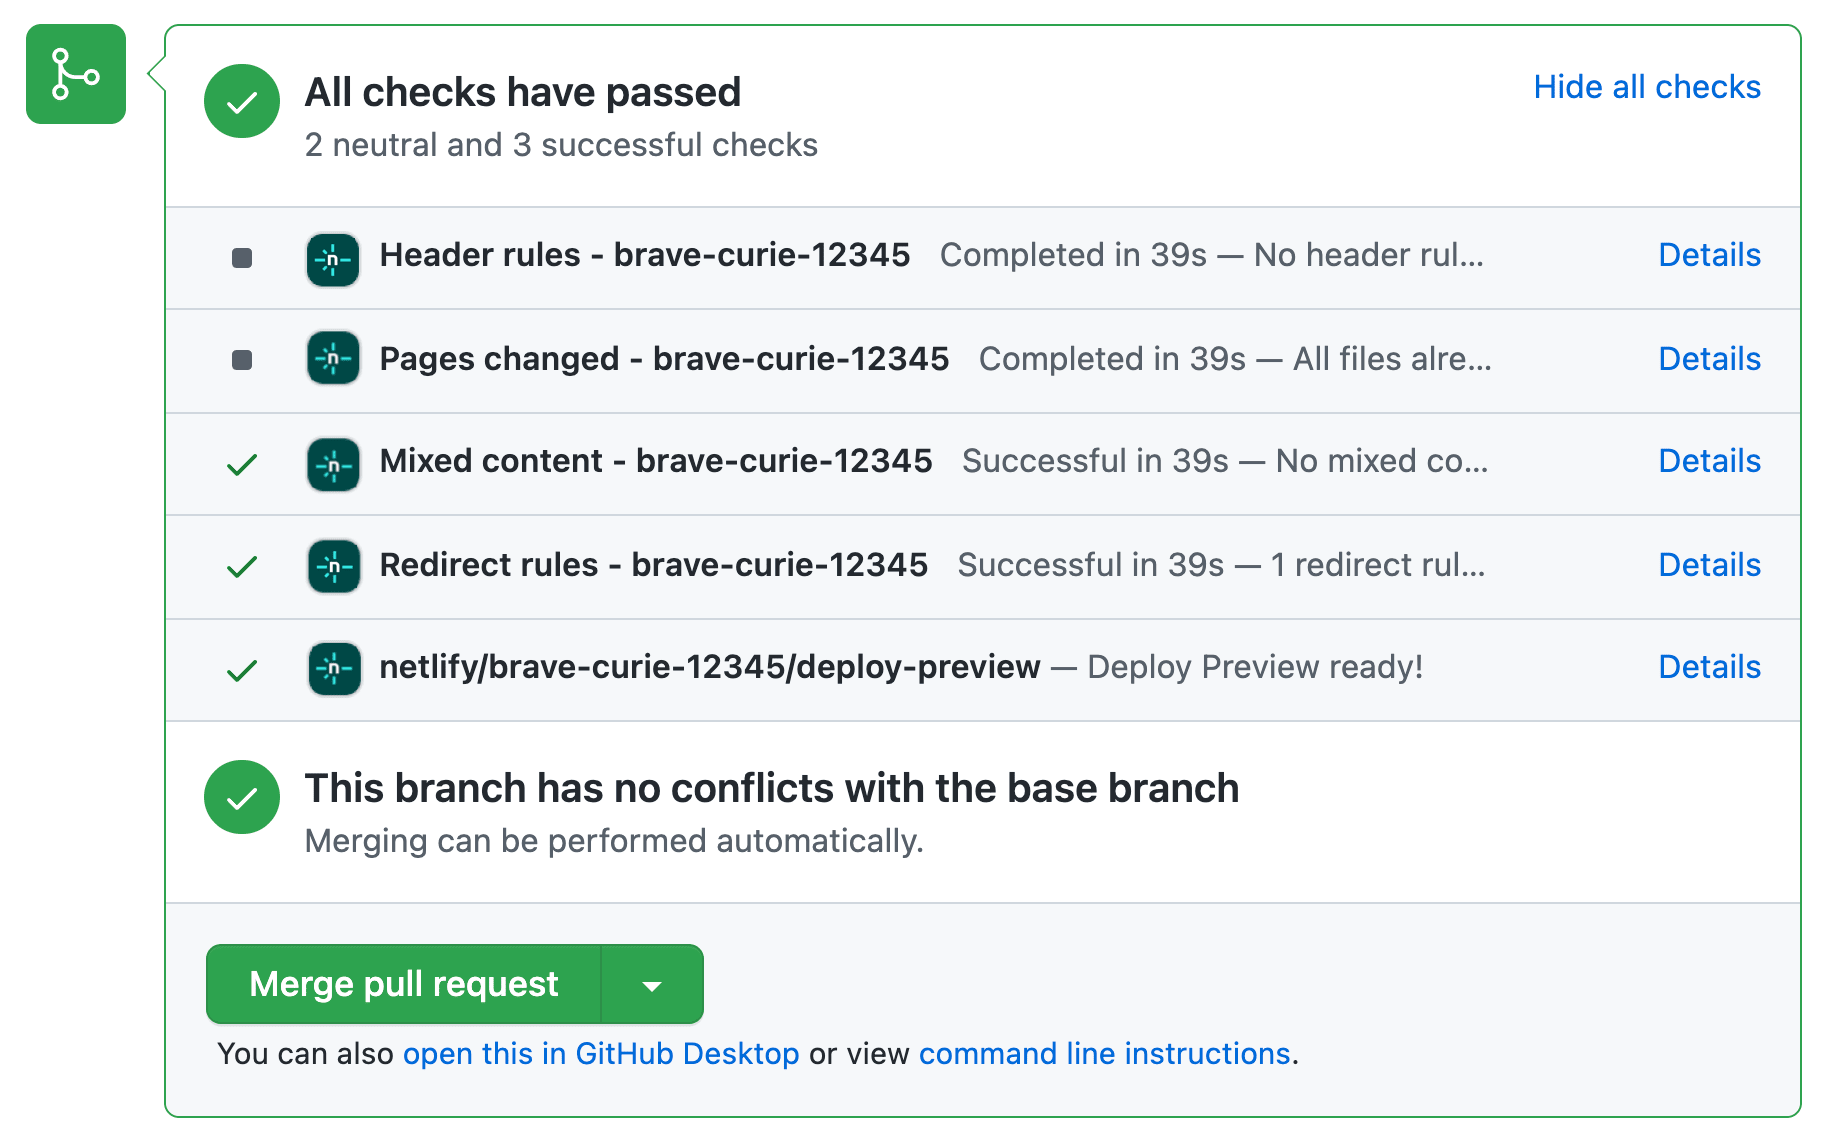 Commit checks for header rules, pages changed, mixed content, redirect rules, deploy preview.